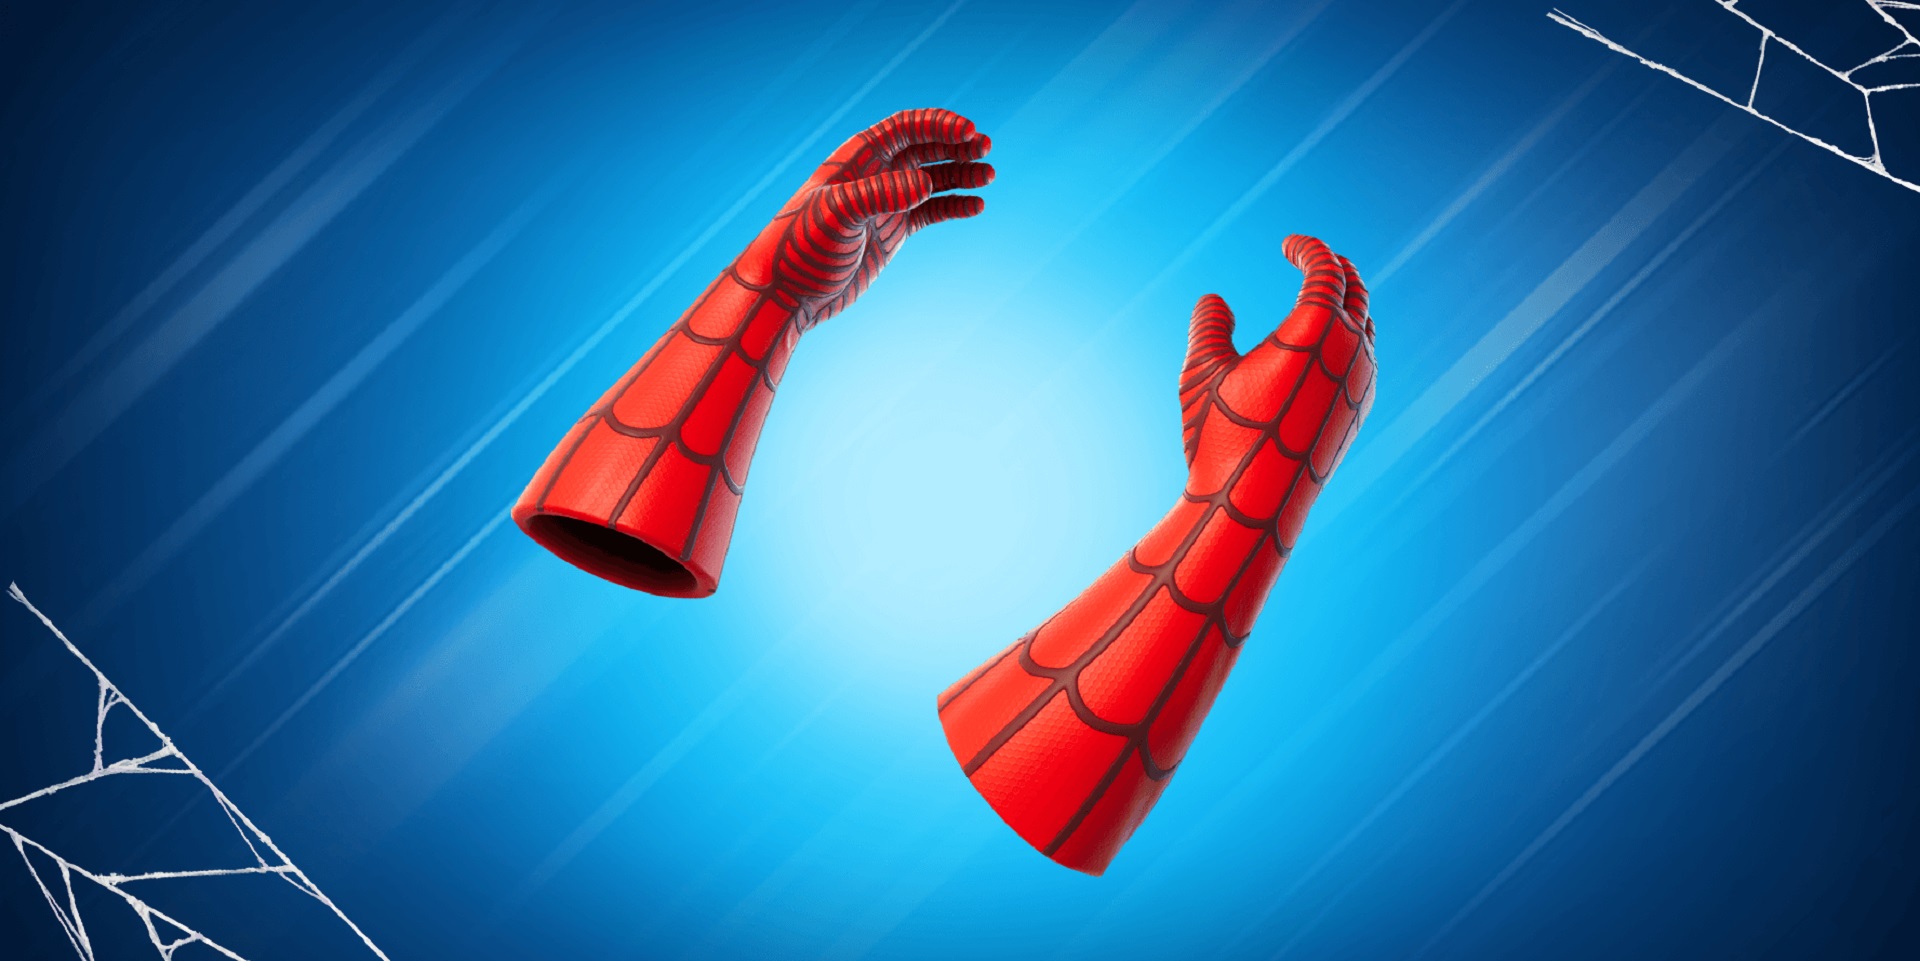 Where to find the webshooters in Fortnite